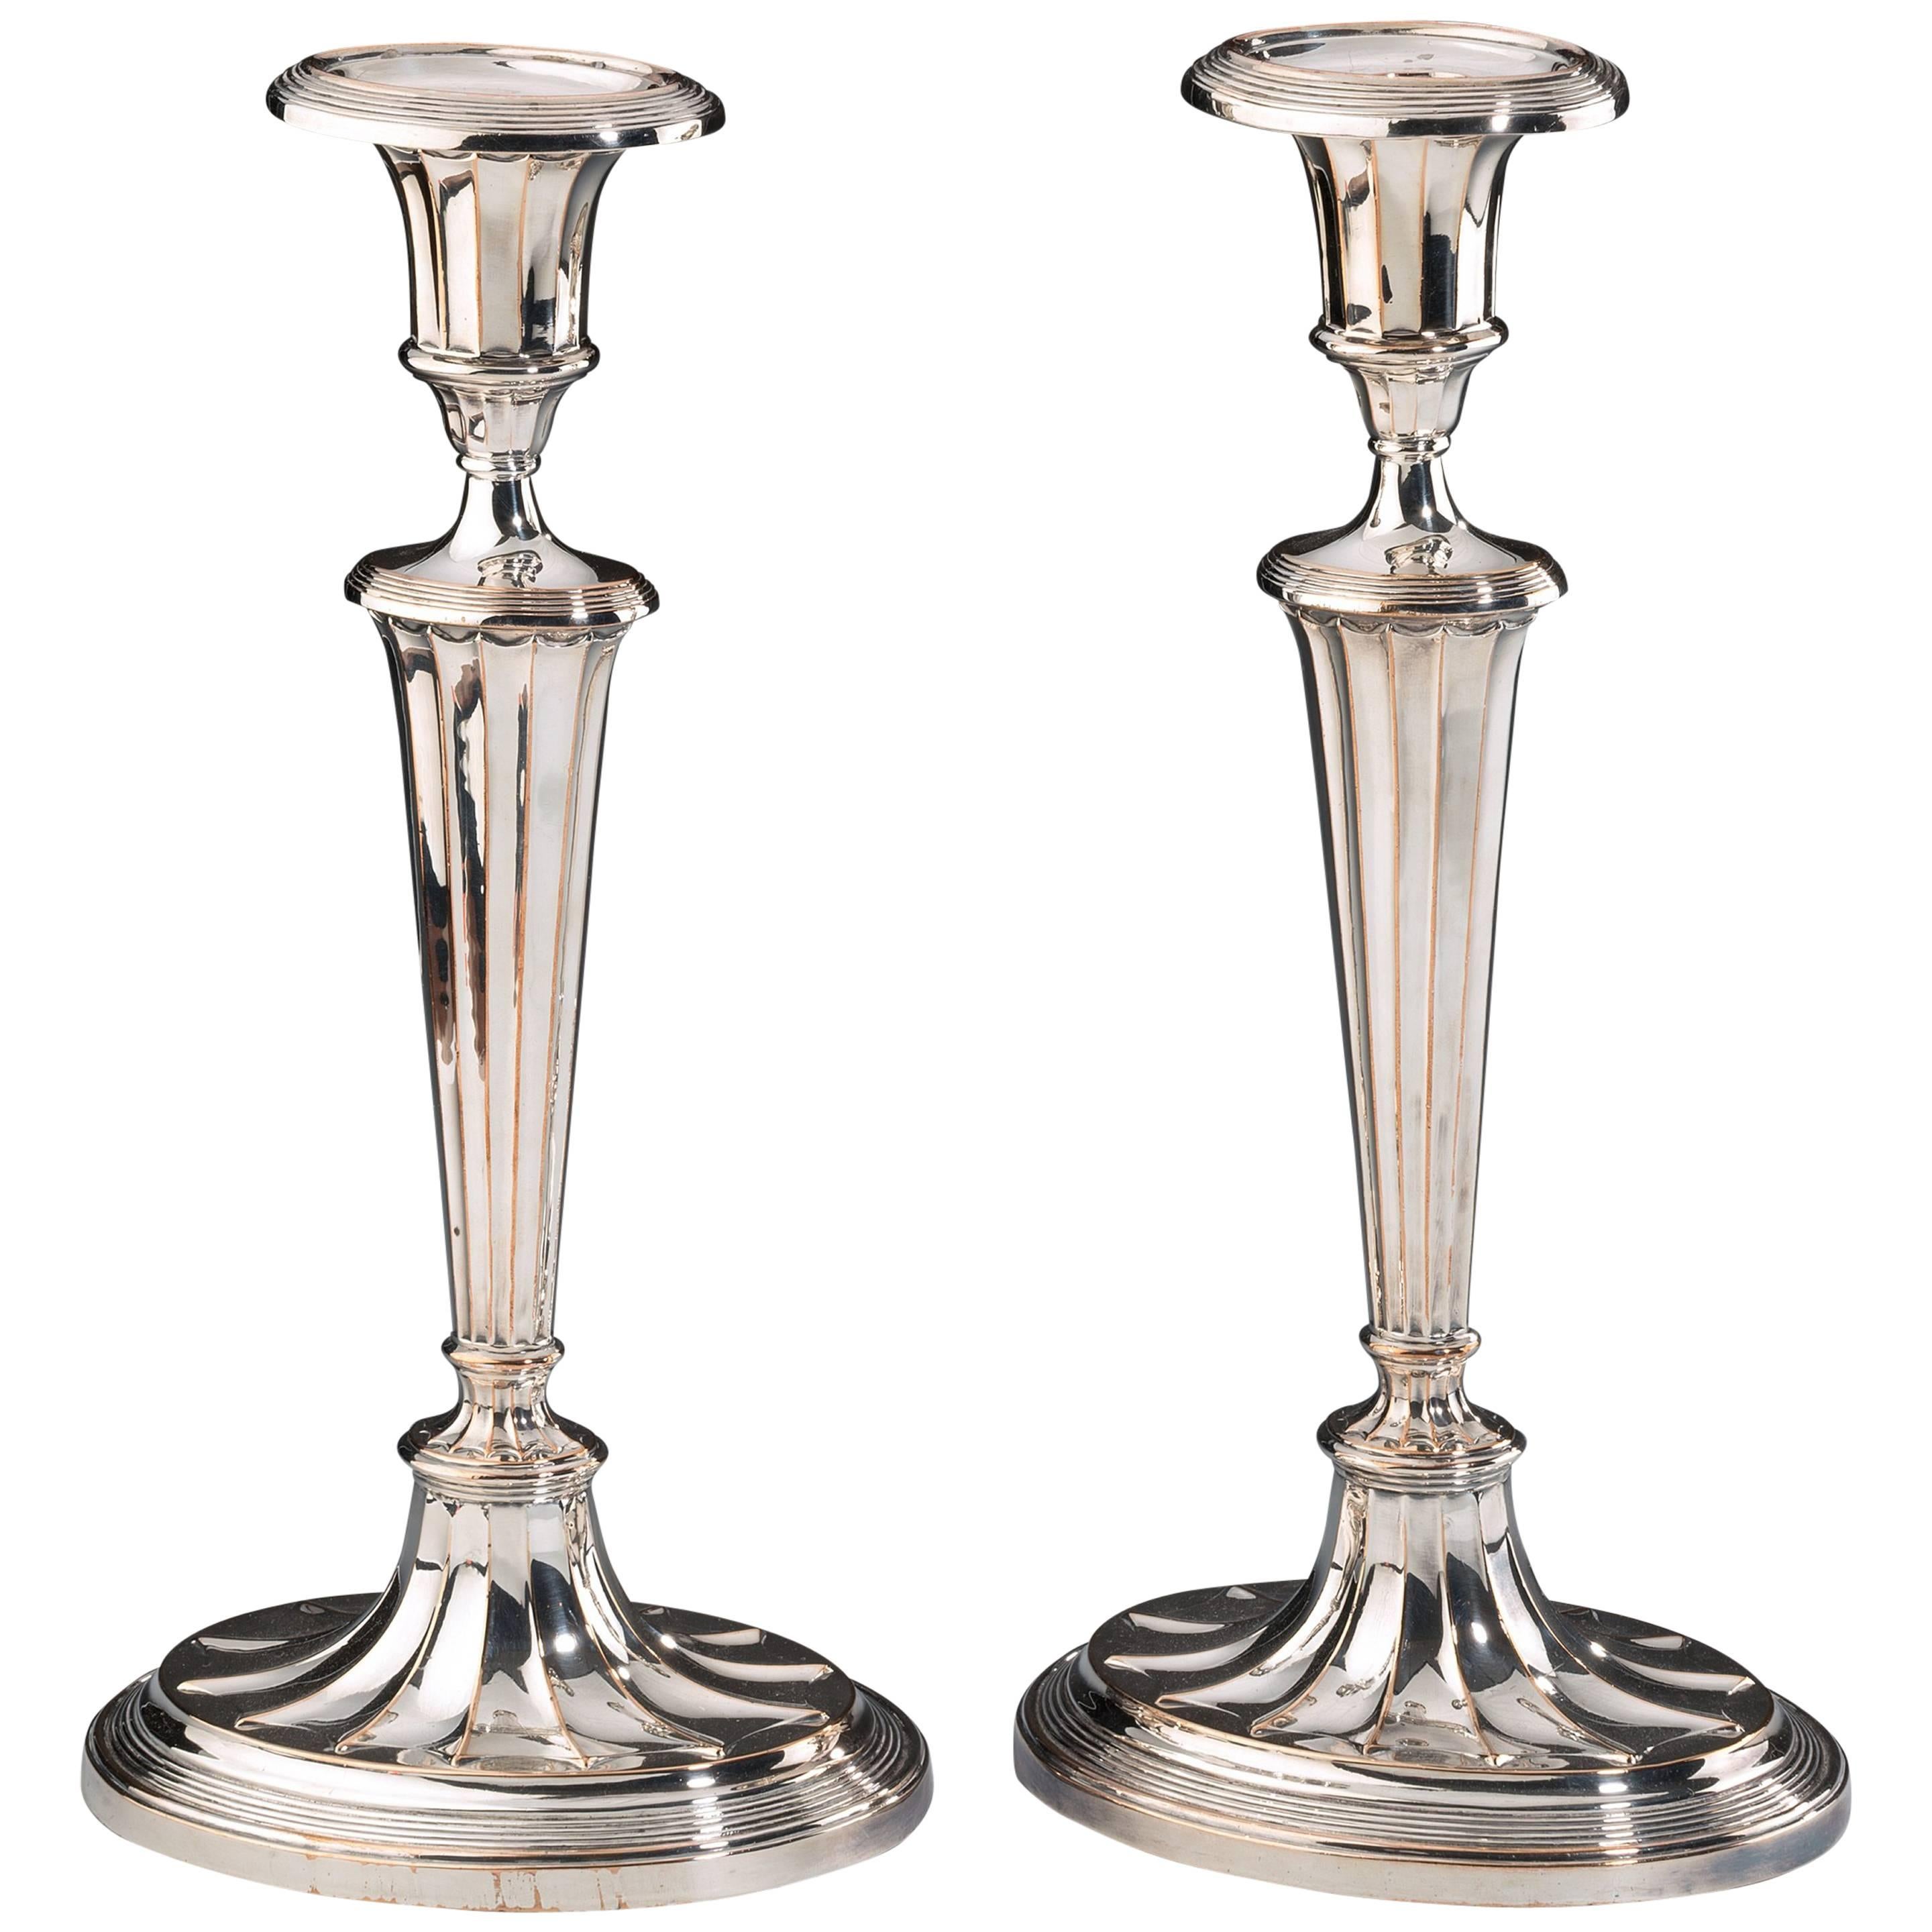 Old Sheffield Plated Candlesticks